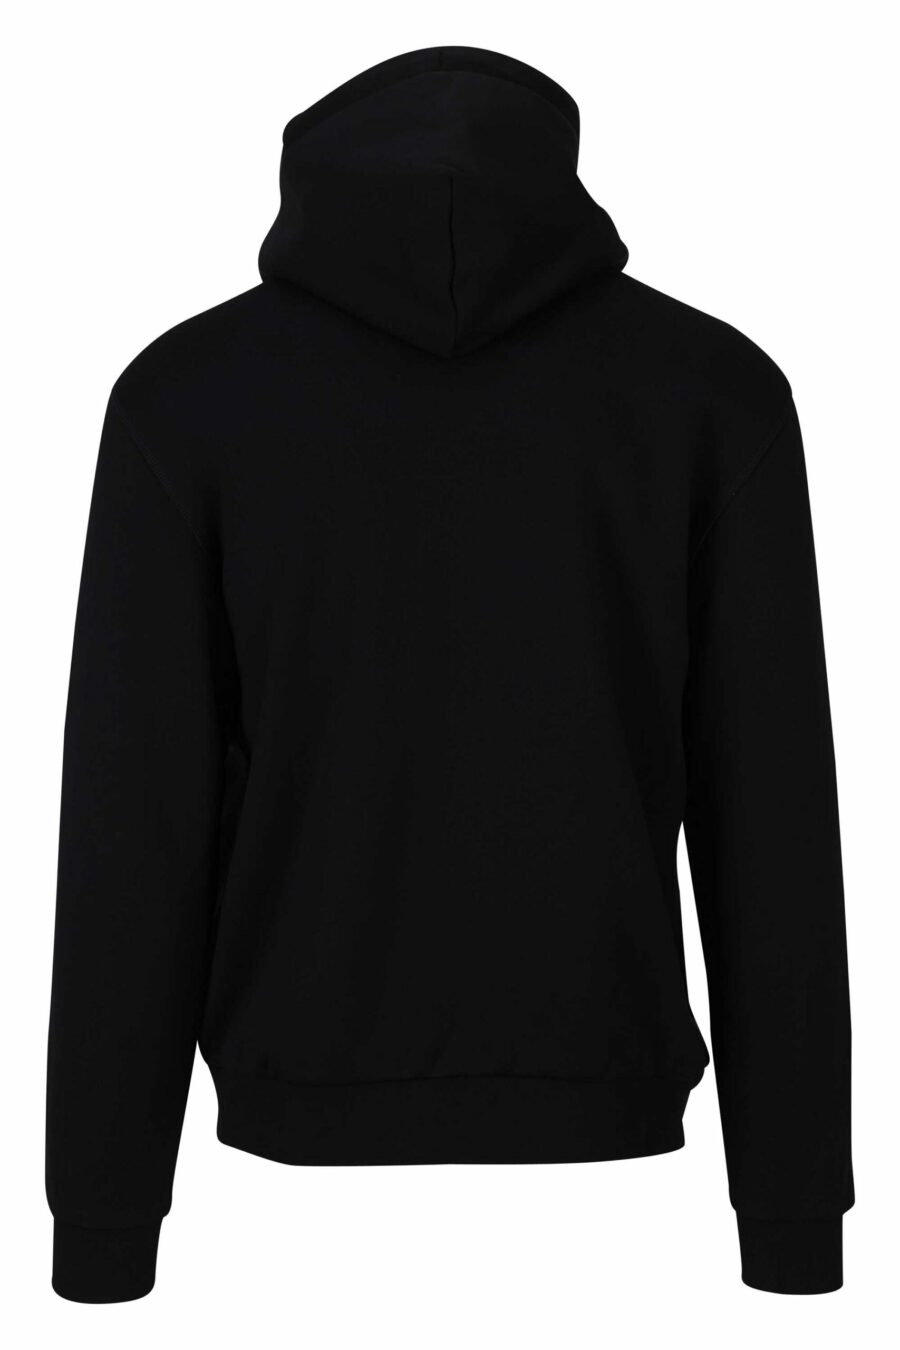 Black hooded sweatshirt with zip and minilogue label "lux identity" - 8056787945869 1 1 scaled